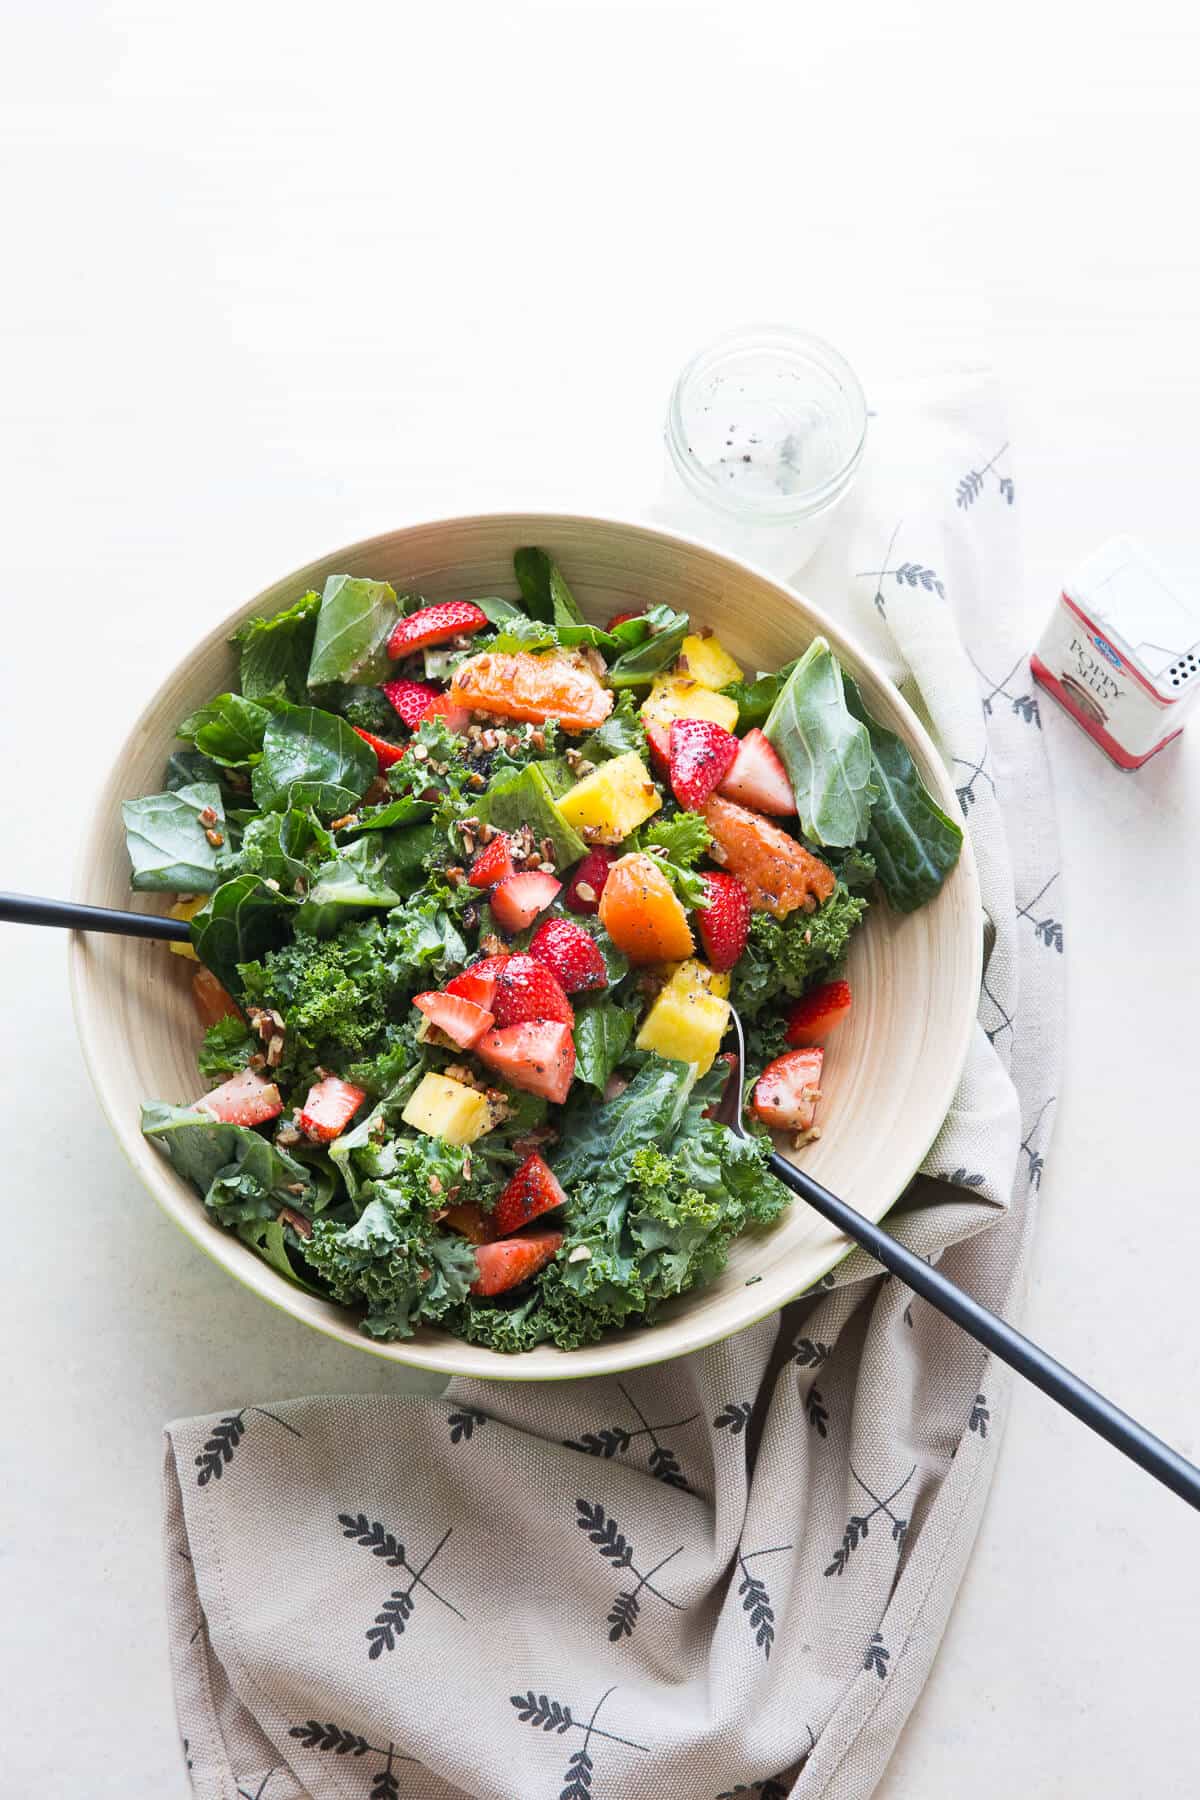 This citrus salad features juicy, fresh fruit and lots of greens! It is fresh and delicious!